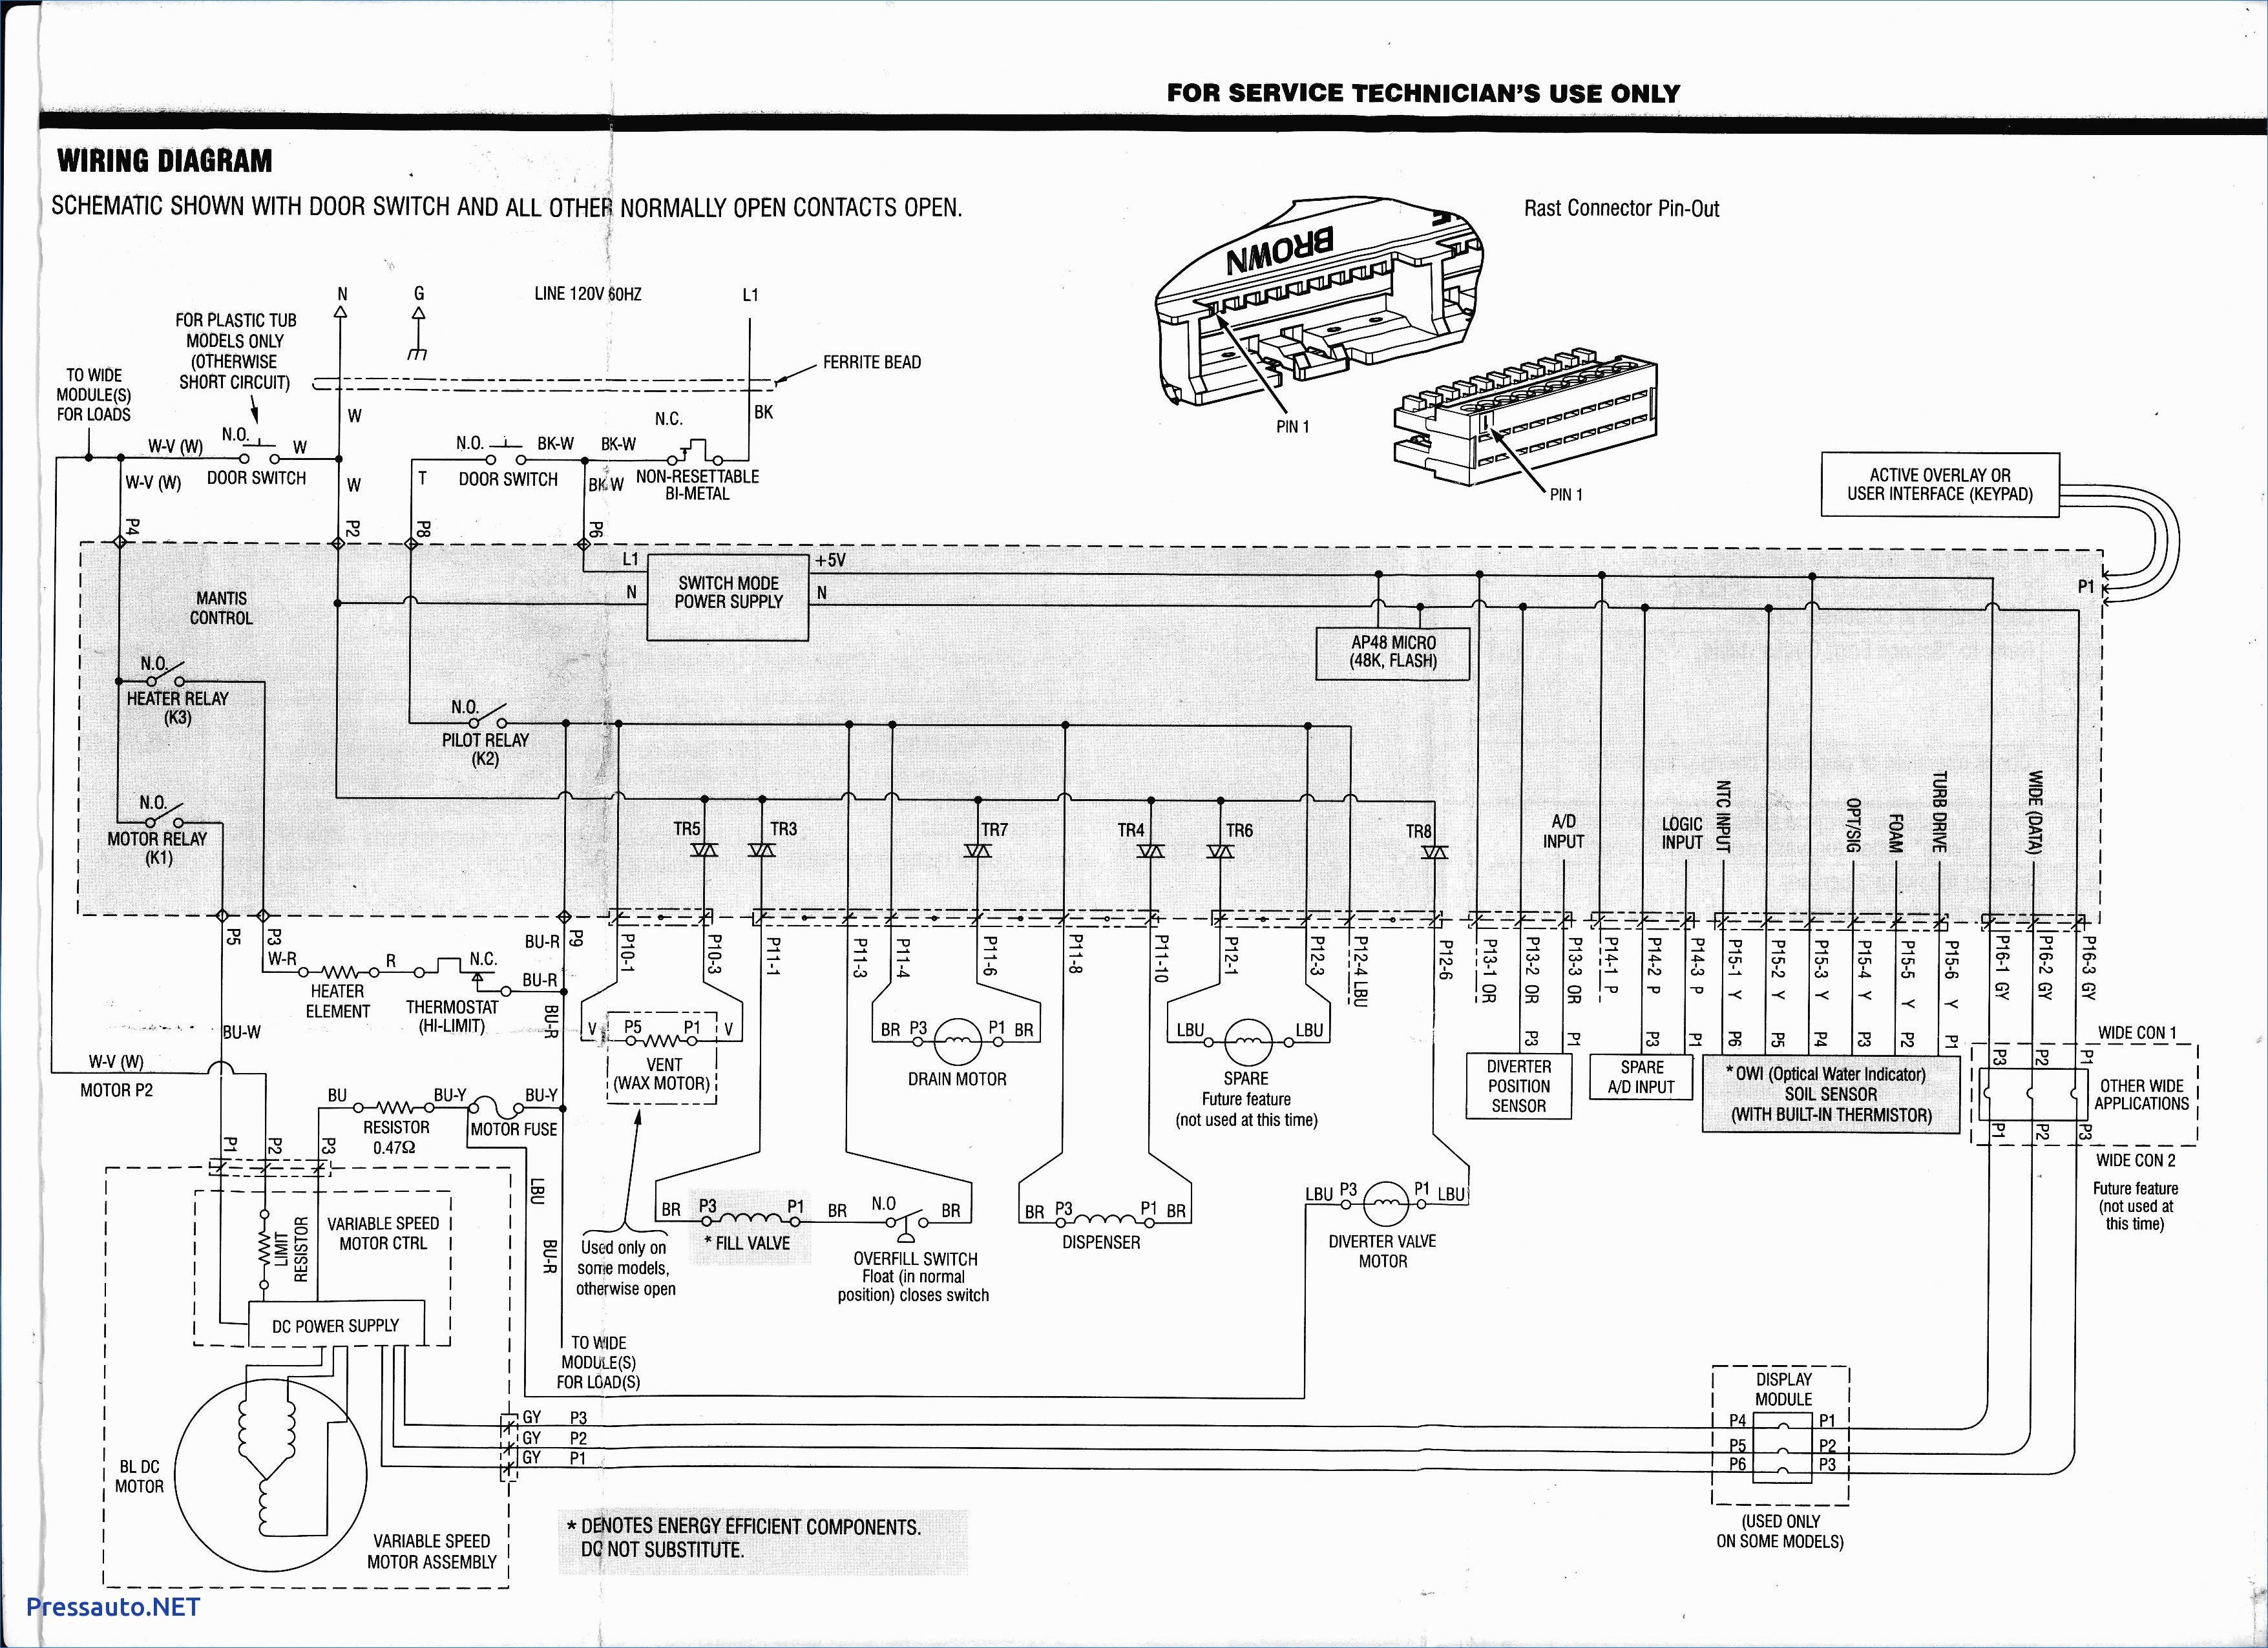 Wiring Diagram Whirlpool Dryer Kenmore Dryer Wiring Diagram Fitfathers Me Que Wire Blurts Of Wiring Diagram Whirlpool Dryer